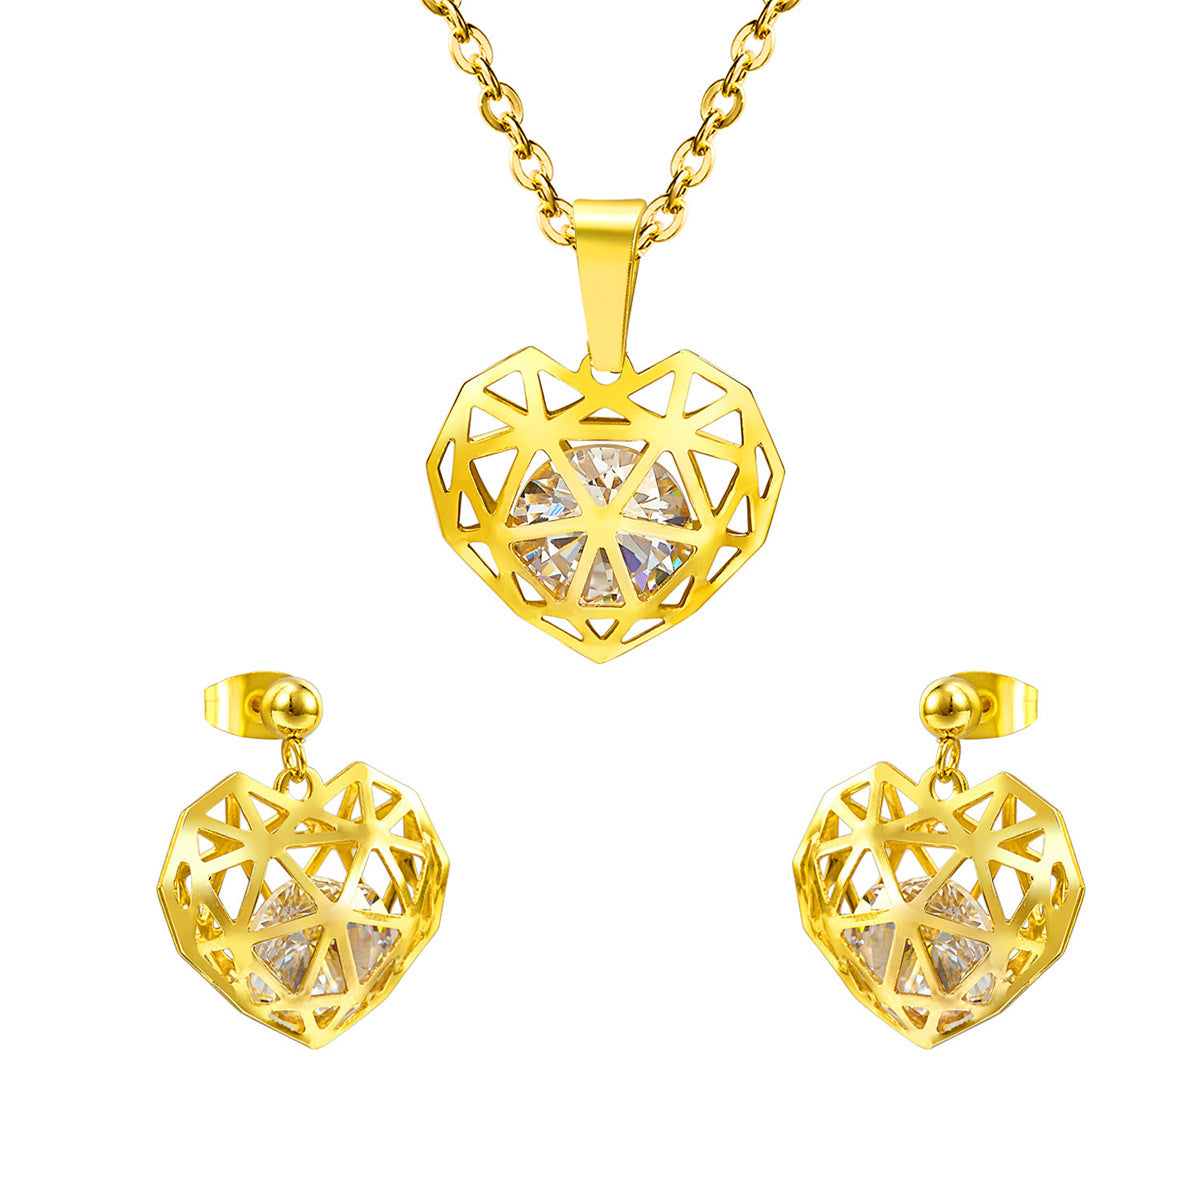 Clear Cubic Zirconia & 18K Gold-Plated Heart Drop Earrings & Pendant Necklace